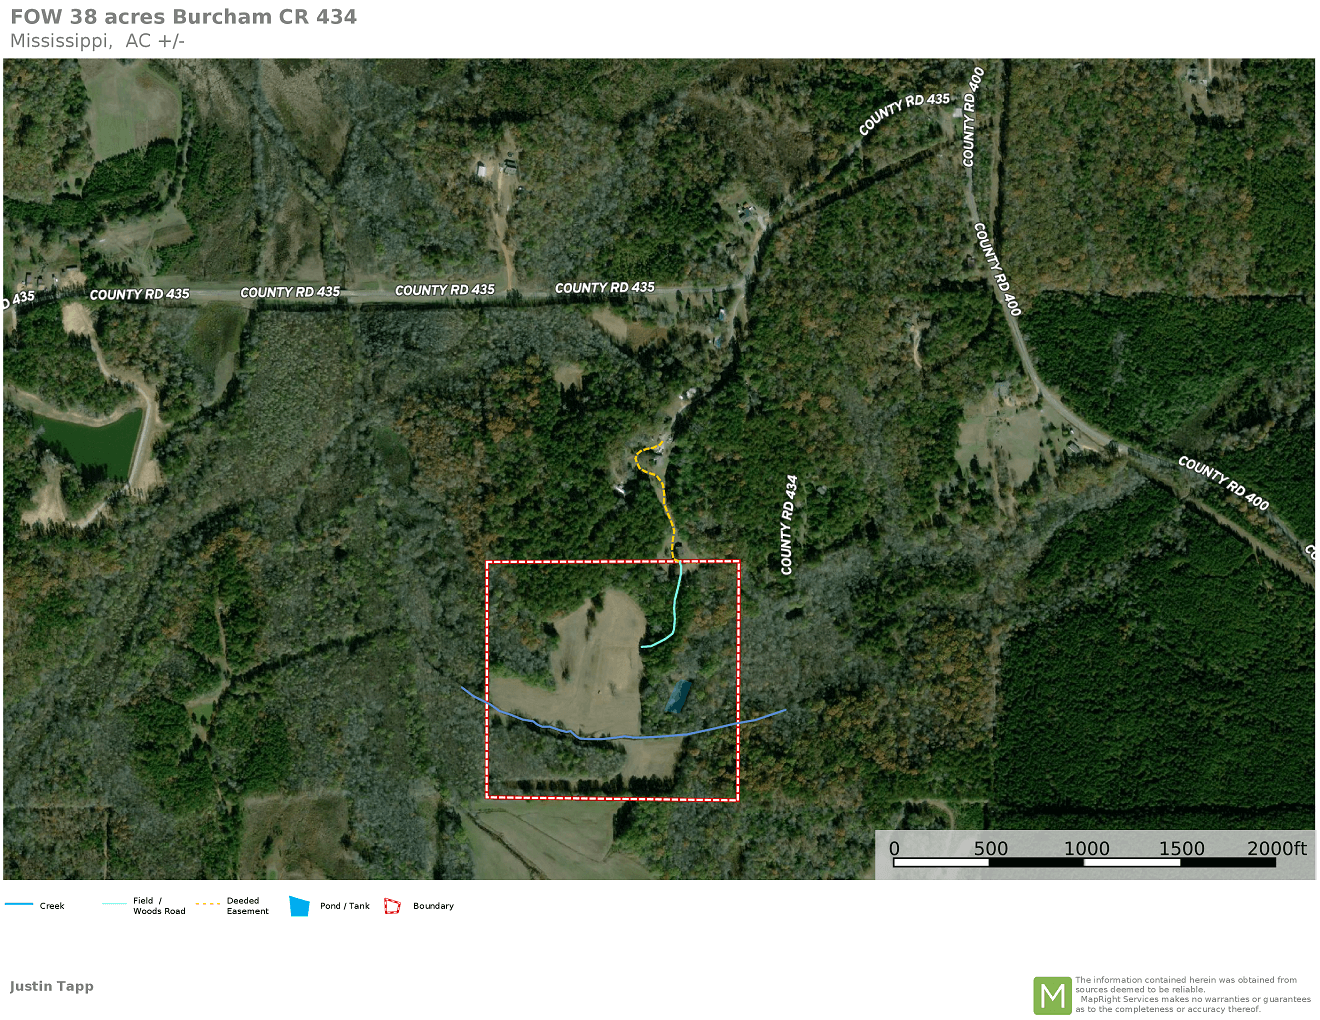 14 FOW156 Burcham Tract 38 acres MLS aerial.png